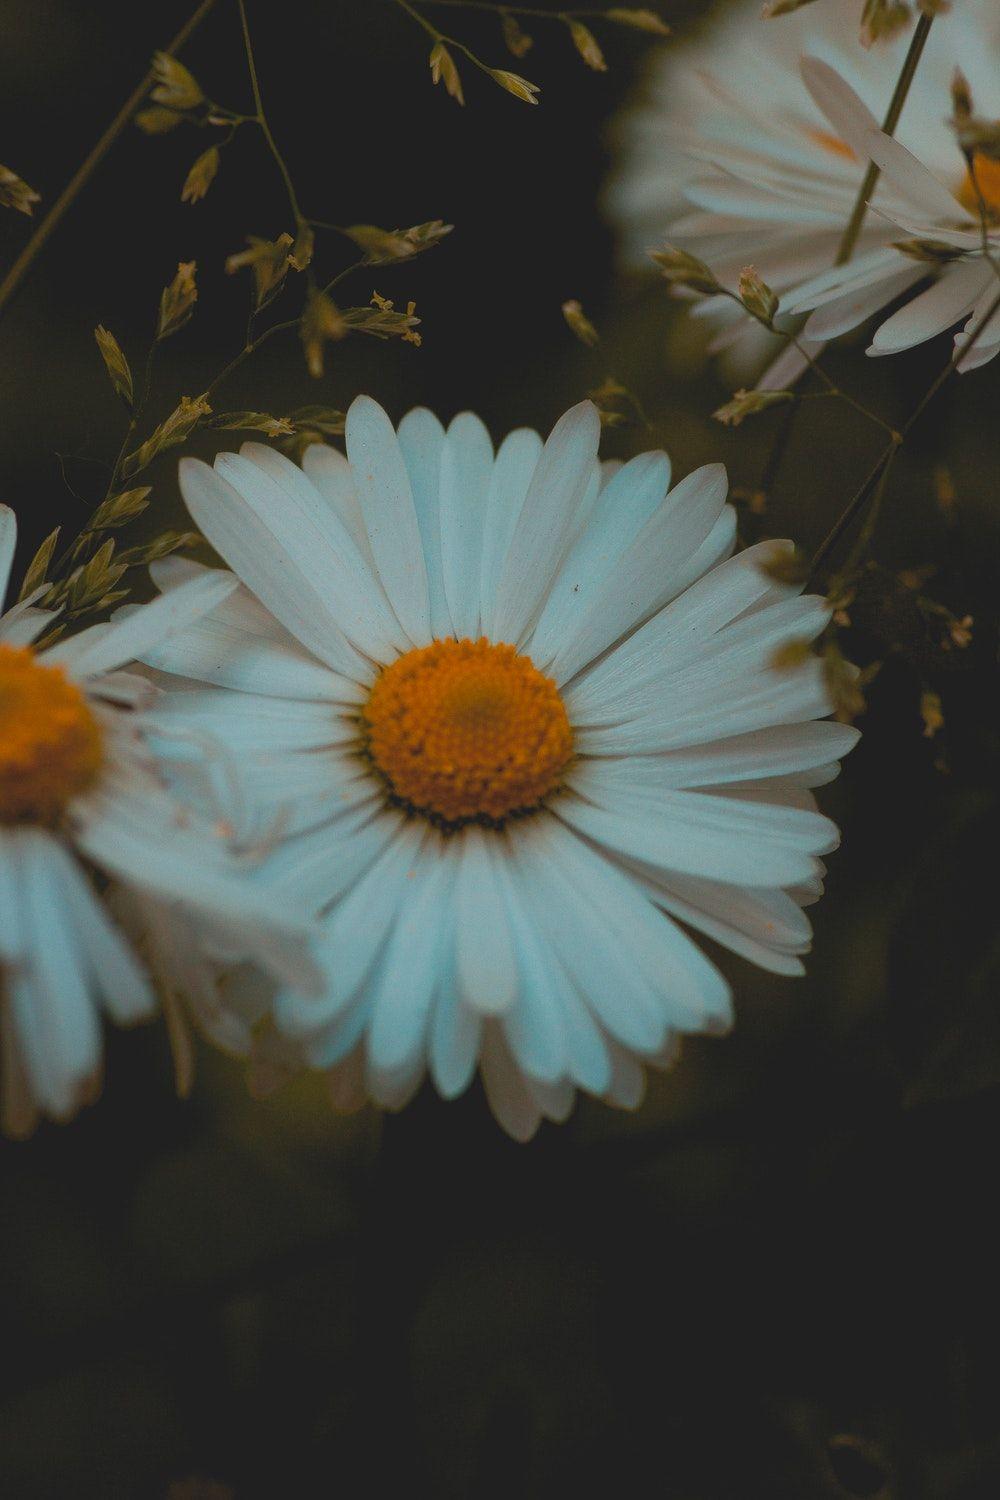 Daisy Aesthetic Wallpapers - Top Free Daisy Aesthetic Backgrounds ...